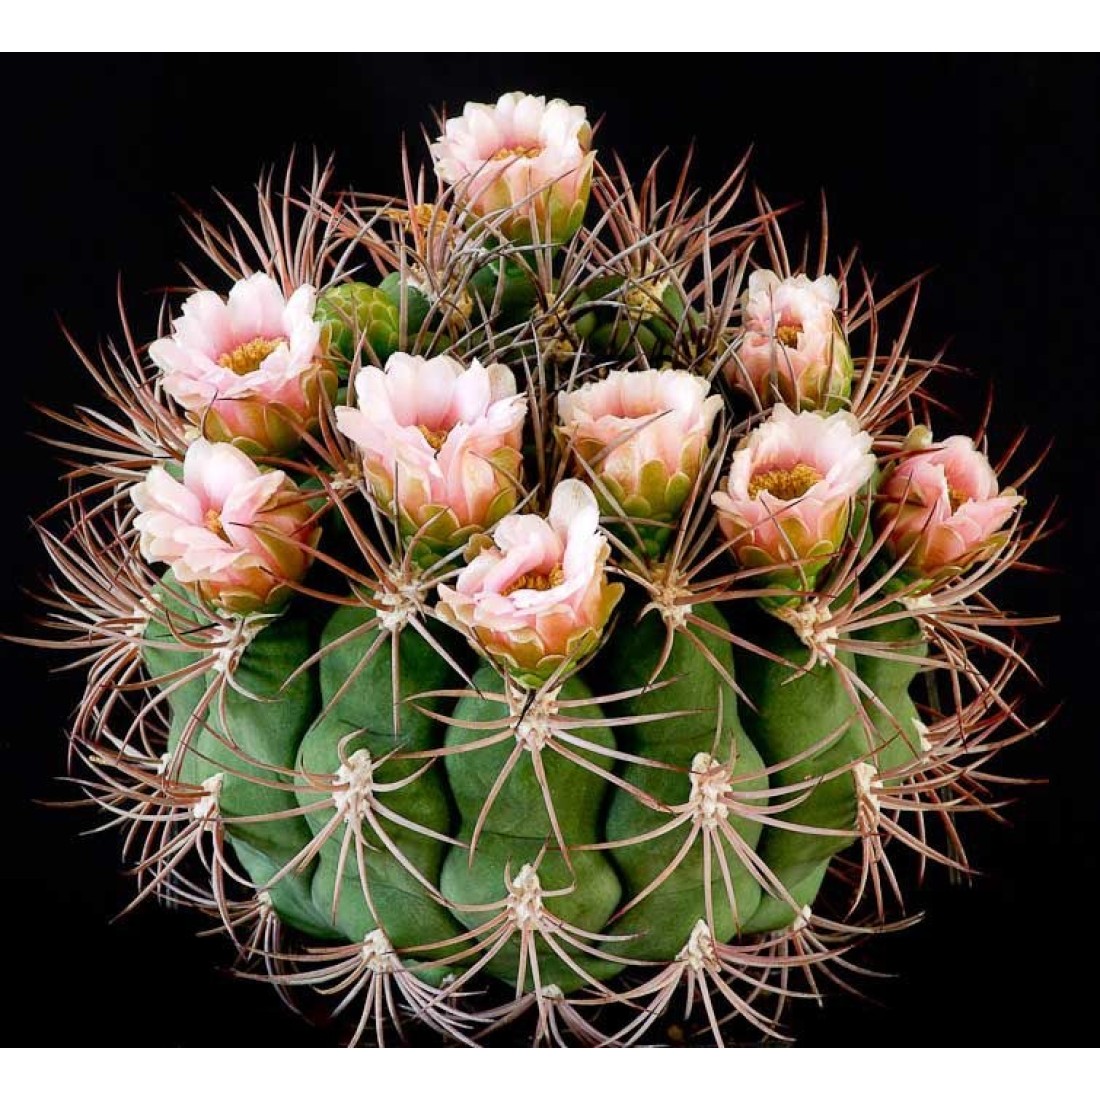 Gymnocalycium saglionis exotic rare Cactus Live Plant Size 8 inches big Blooming Size